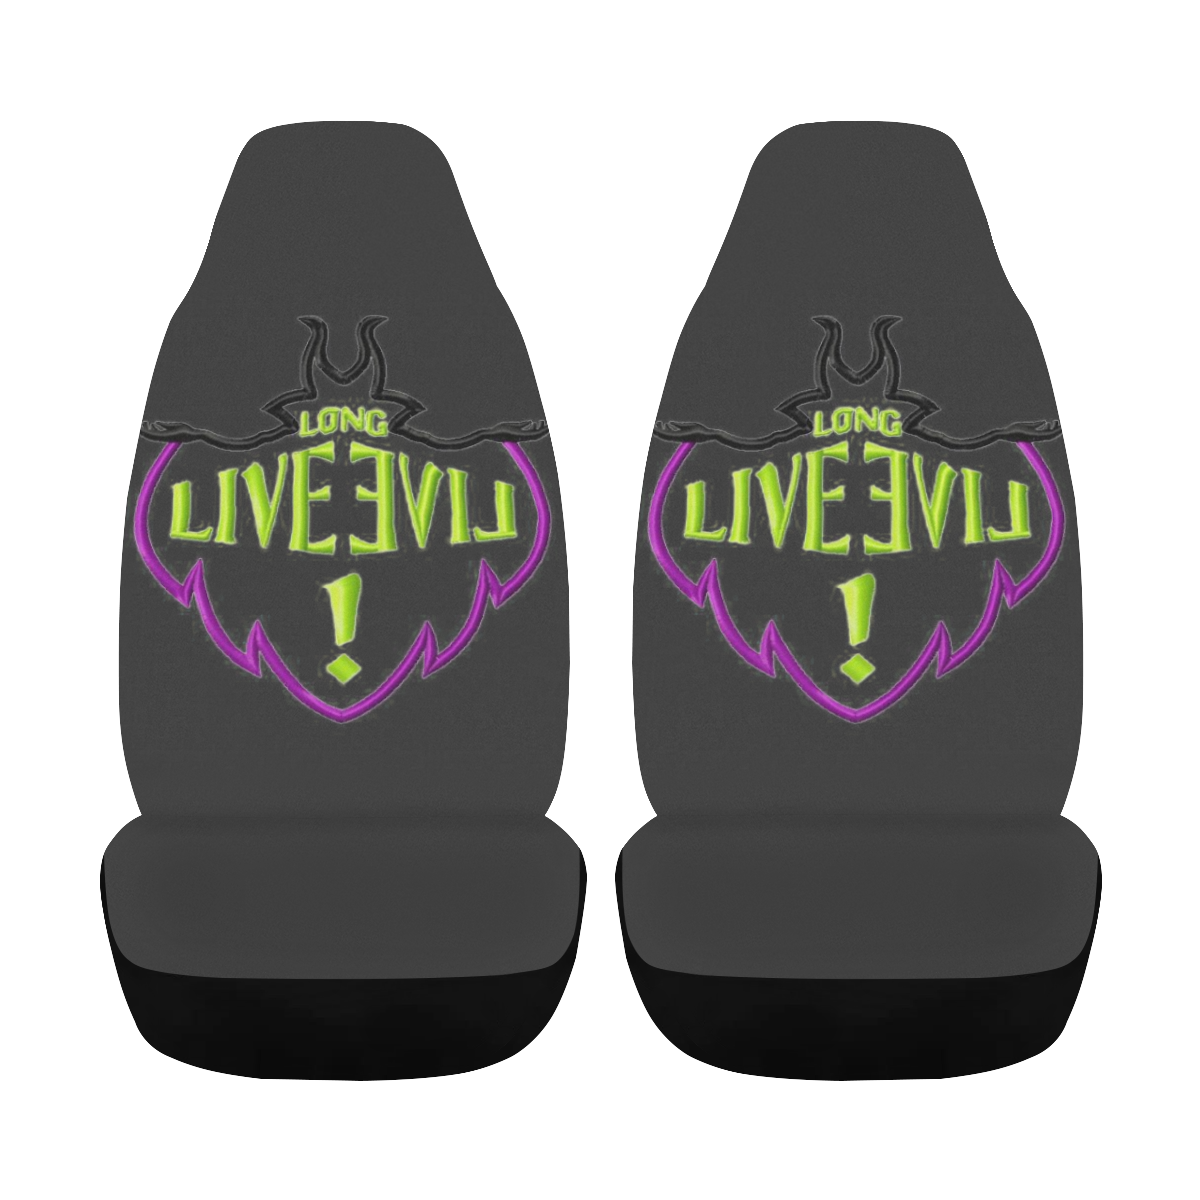 Long Live Evil Car Seat Cover Airbag Compatible (Set of 2)